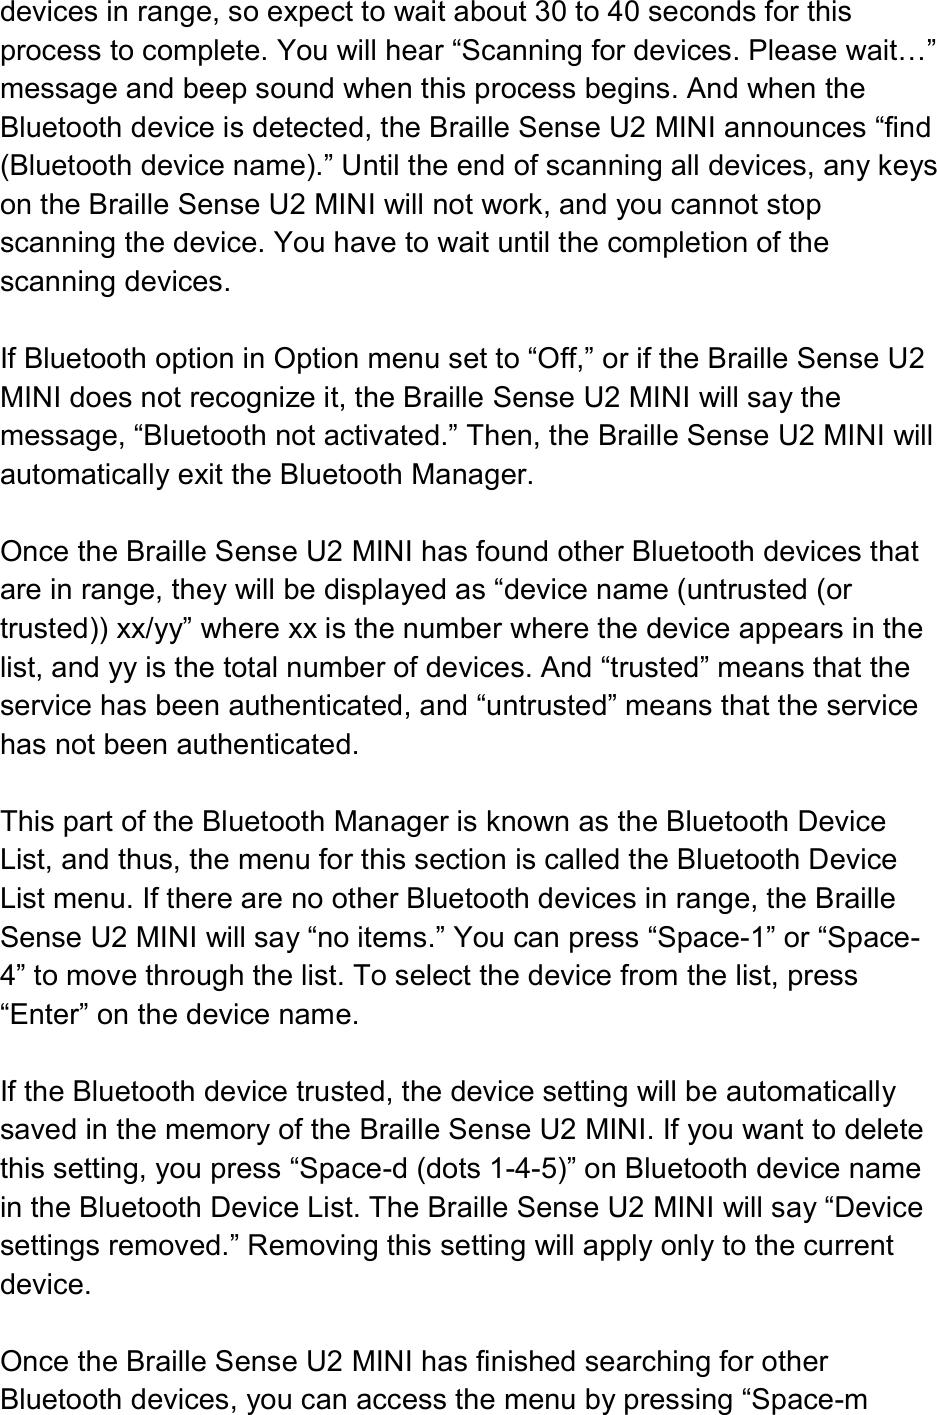  devices in range, so expect to wait about 30 to 40 seconds for this process to complete. You will hear “Scanning for devices. Please wait…” message and beep sound when this process begins. And when the Bluetooth device is detected, the Braille Sense U2 MINI announces “find (Bluetooth device name).” Until the end of scanning all devices, any keys on the Braille Sense U2 MINI will not work, and you cannot stop scanning the device. You have to wait until the completion of the scanning devices.  If Bluetooth option in Option menu set to “Off,” or if the Braille Sense U2 MINI does not recognize it, the Braille Sense U2 MINI will say the message, “Bluetooth not activated.” Then, the Braille Sense U2 MINI will automatically exit the Bluetooth Manager.  Once the Braille Sense U2 MINI has found other Bluetooth devices that are in range, they will be displayed as “device name (untrusted (or trusted)) xx/yy” where xx is the number where the device appears in the list, and yy is the total number of devices. And “trusted” means that the service has been authenticated, and “untrusted” means that the service has not been authenticated.  This part of the Bluetooth Manager is known as the Bluetooth Device List, and thus, the menu for this section is called the Bluetooth Device List menu. If there are no other Bluetooth devices in range, the Braille Sense U2 MINI will say “no items.” You can press “Space-1” or “Space-4” to move through the list. To select the device from the list, press “Enter” on the device name.  If the Bluetooth device trusted, the device setting will be automatically saved in the memory of the Braille Sense U2 MINI. If you want to delete this setting, you press “Space-d (dots 1-4-5)” on Bluetooth device name in the Bluetooth Device List. The Braille Sense U2 MINI will say “Device settings removed.” Removing this setting will apply only to the current device.  Once the Braille Sense U2 MINI has finished searching for other Bluetooth devices, you can access the menu by pressing “Space-m 